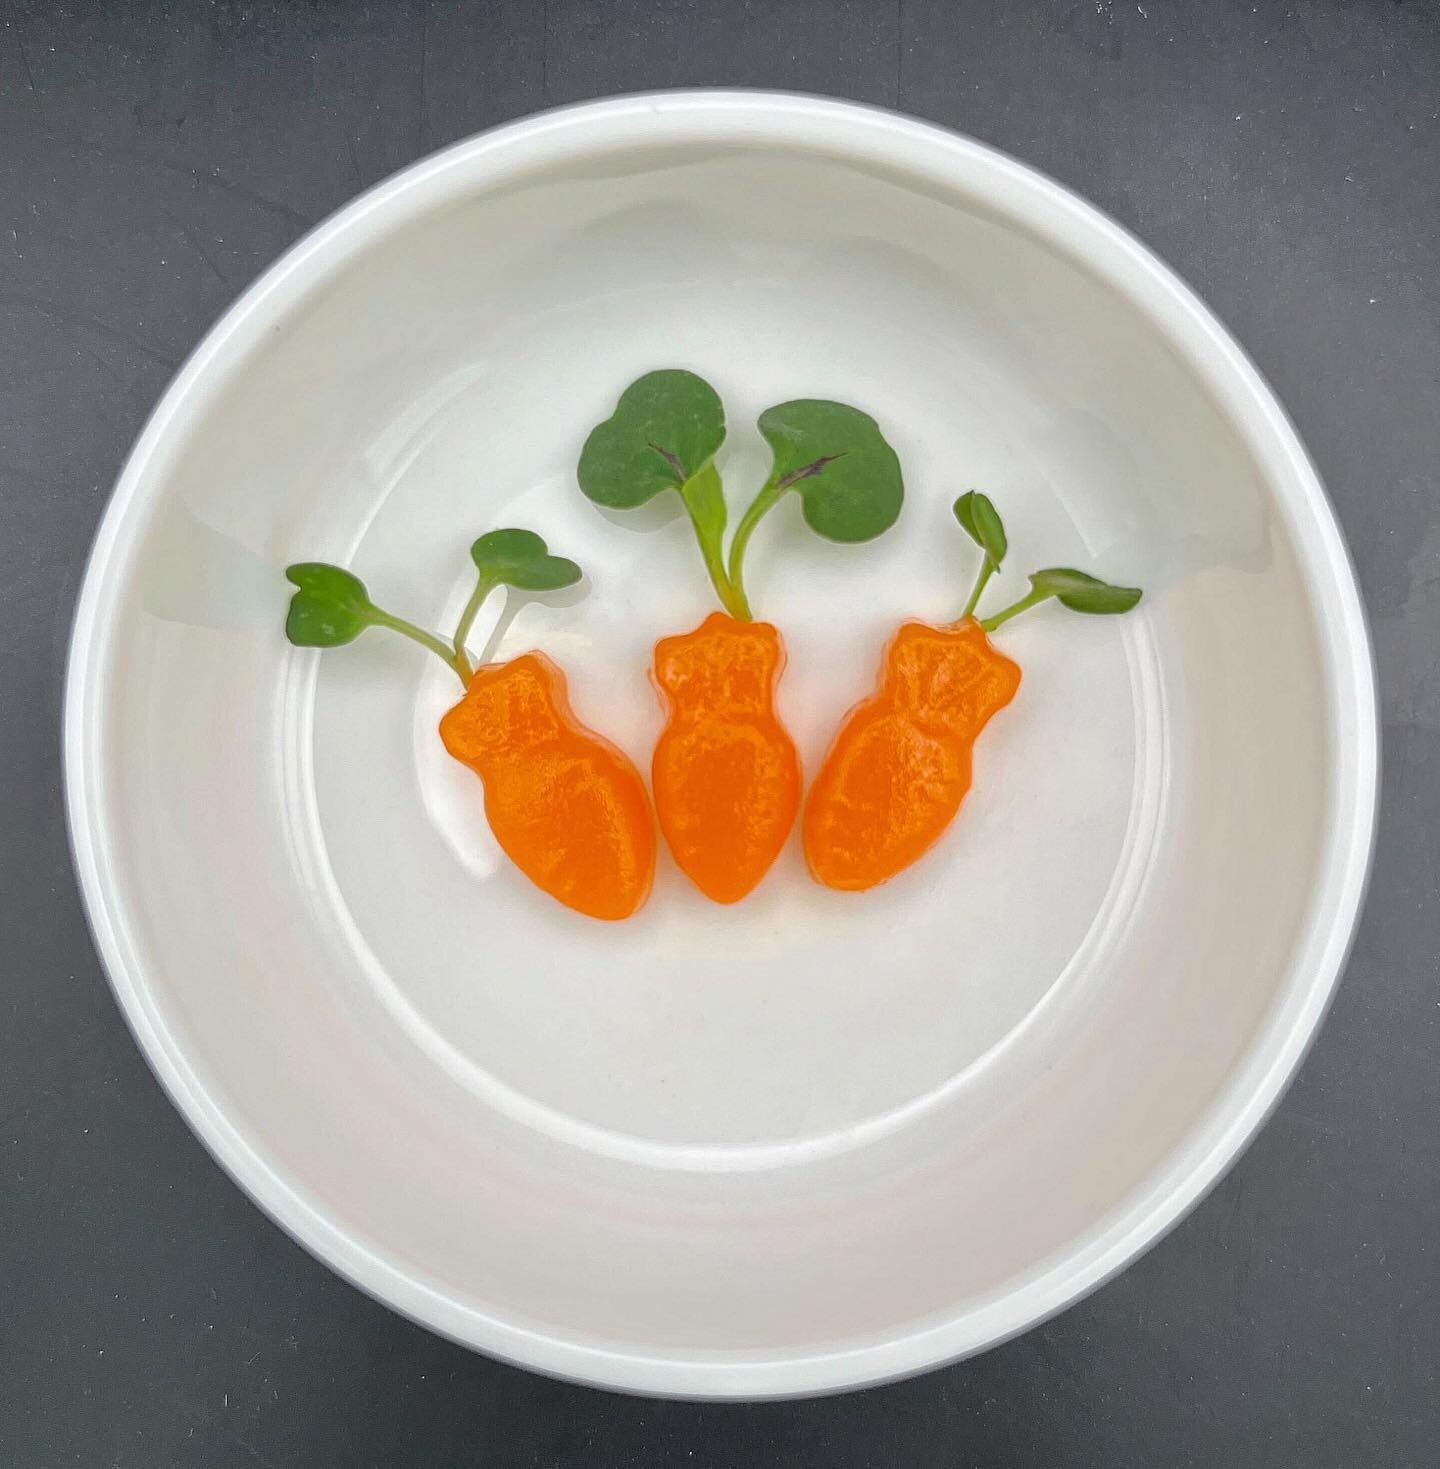 Hoppy days ahead with Impact Food&rsquo;s sneak peek into our latest creation! 🐰🥕 

Stay tuned for the big reveal of our regular-shaped plant-based salmon - because while carrots are cute, classic never goes out of style! 🌱✨
#sustainableeats